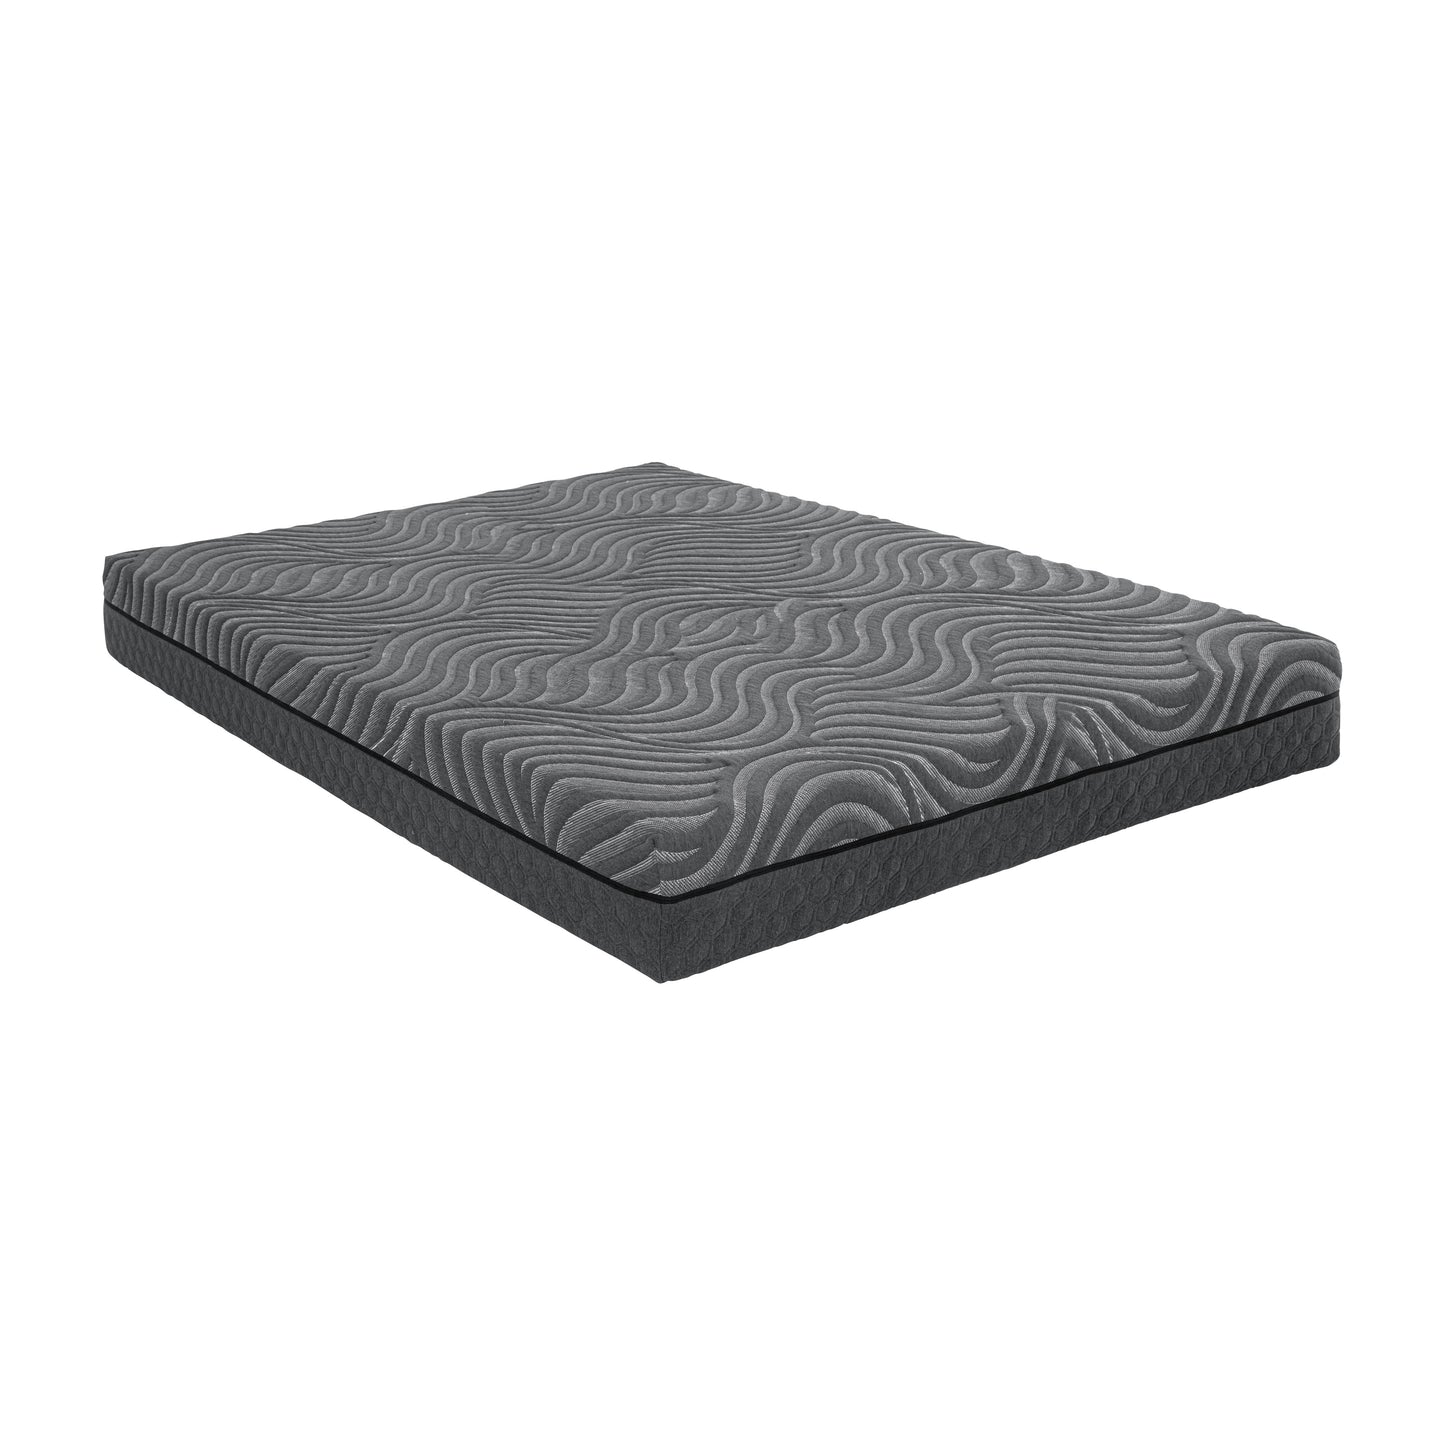 QUEEN 8'' Copper-Infused Memory Foam Hybrid-Taurus Collection